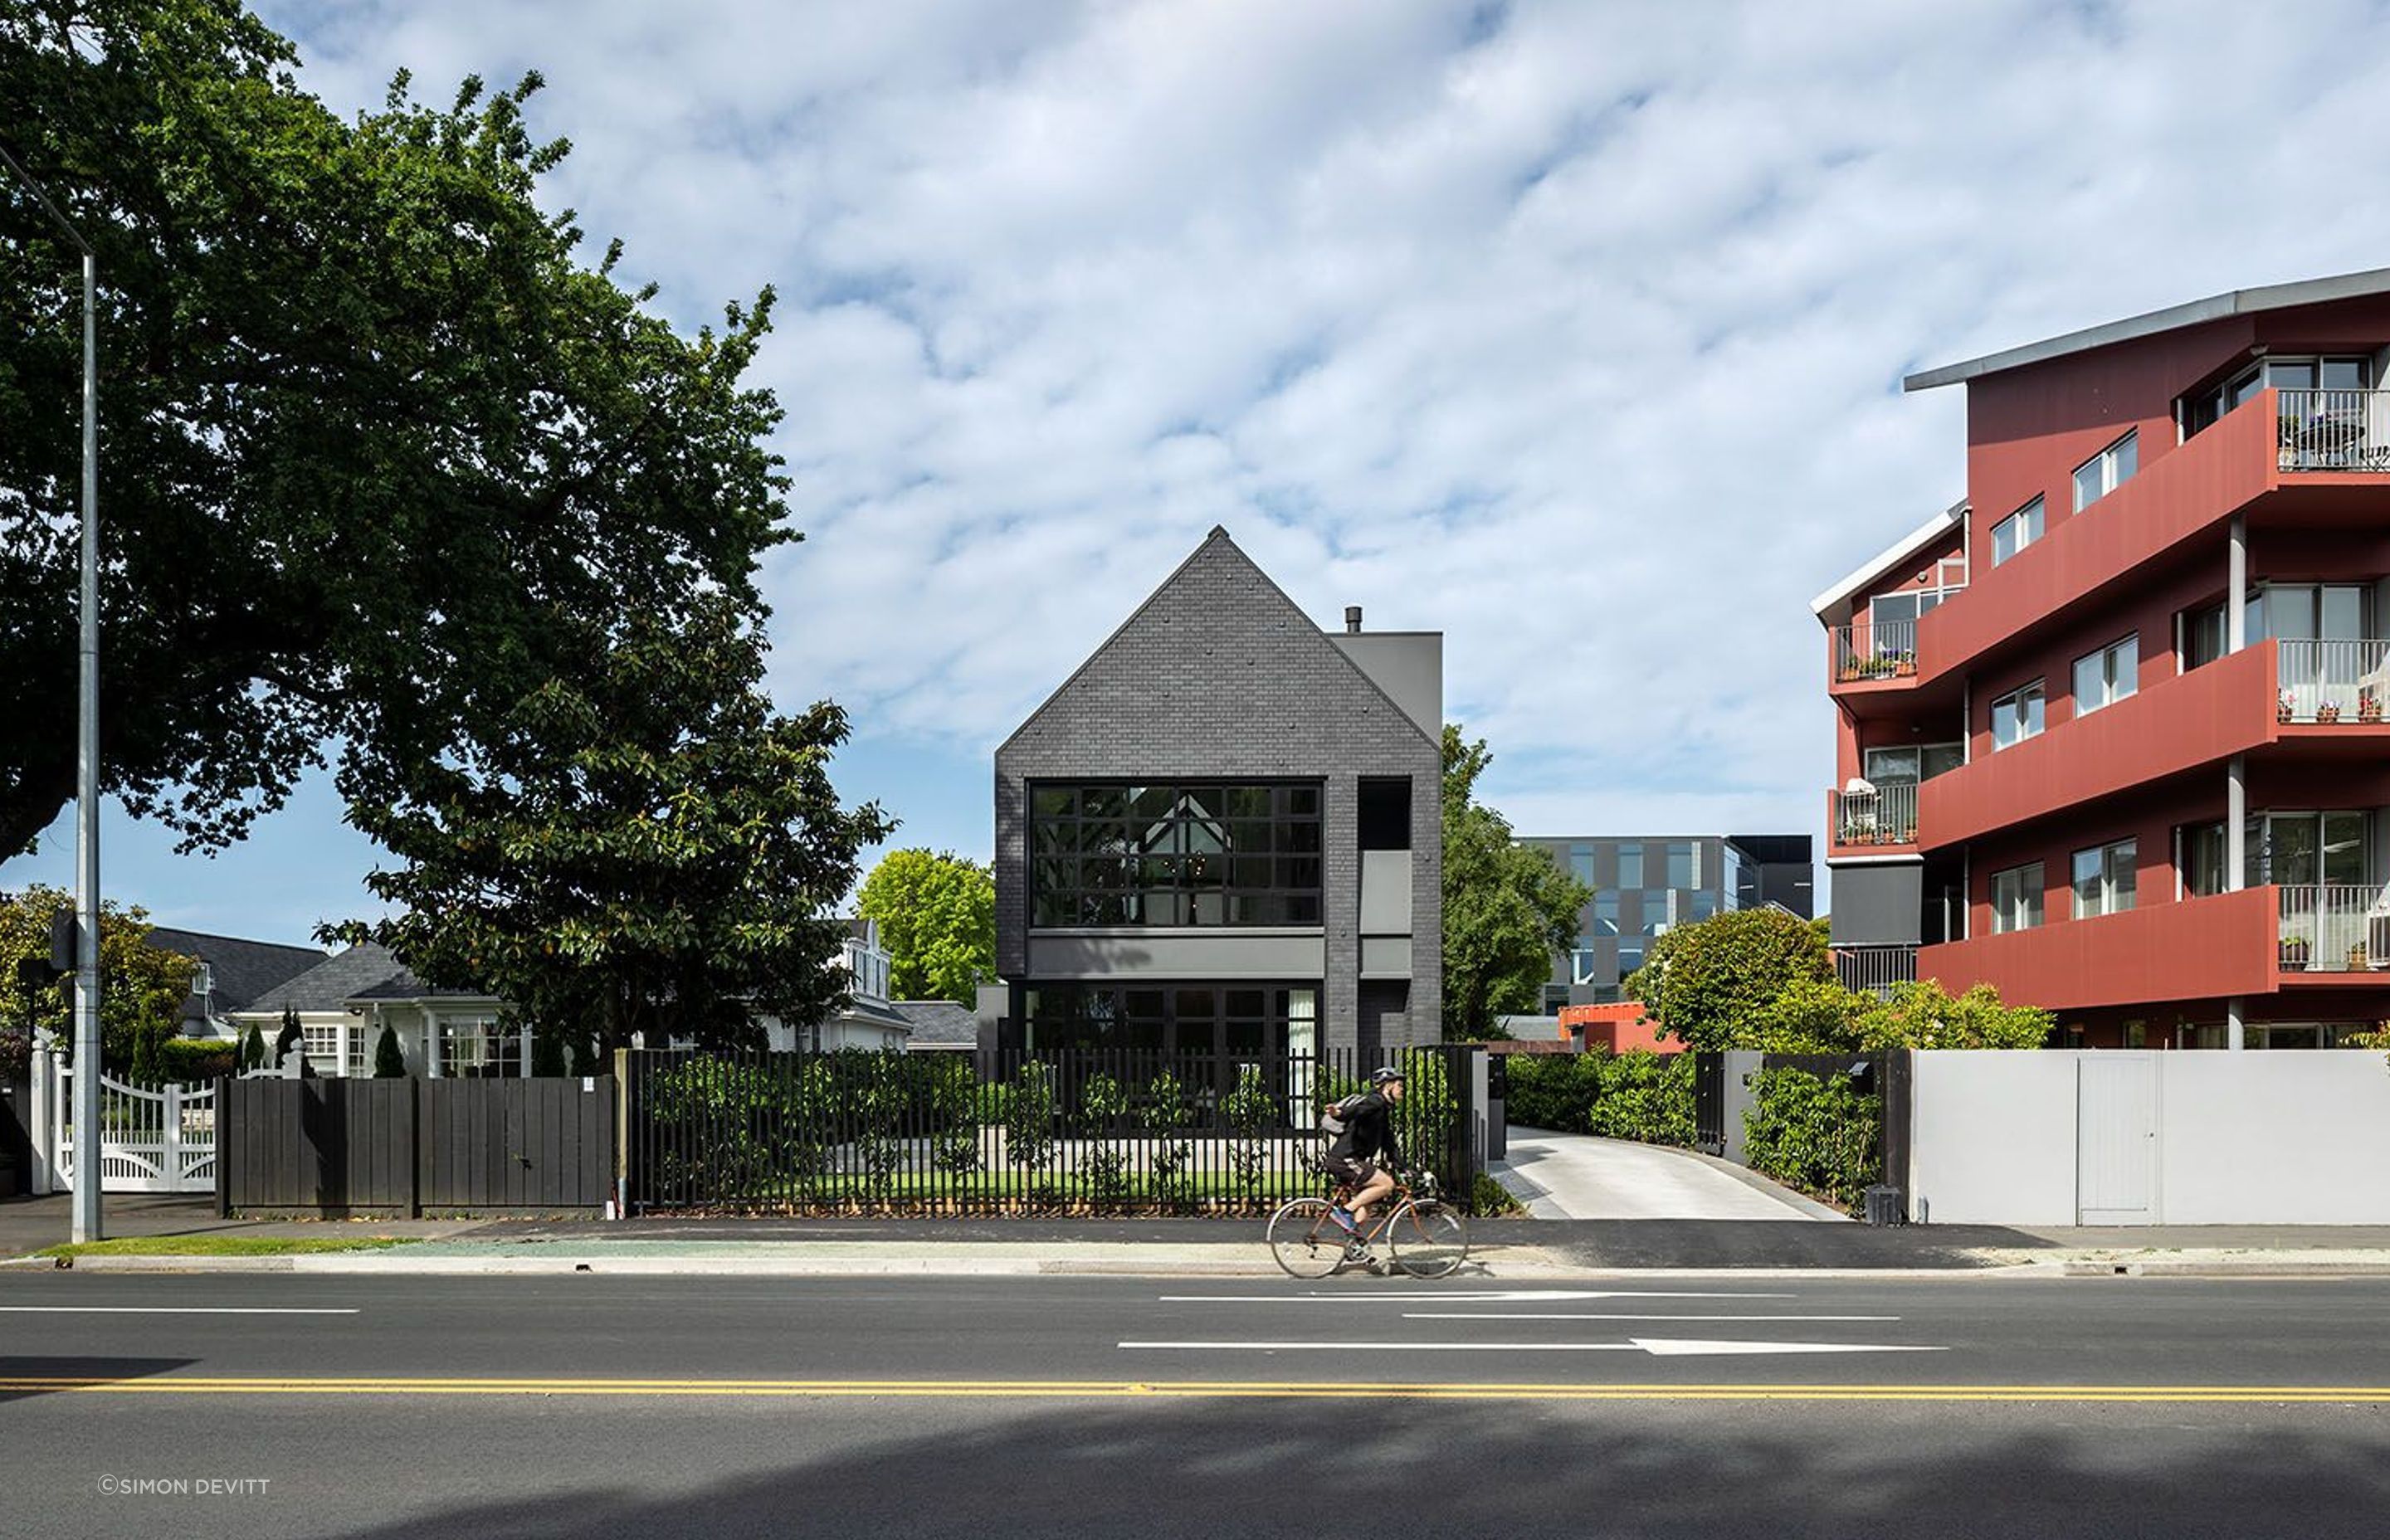 Park Terrace House is sited between an original home and a new multi-unit development in central Christchurch, located opposite the Avon and Hagley Park.